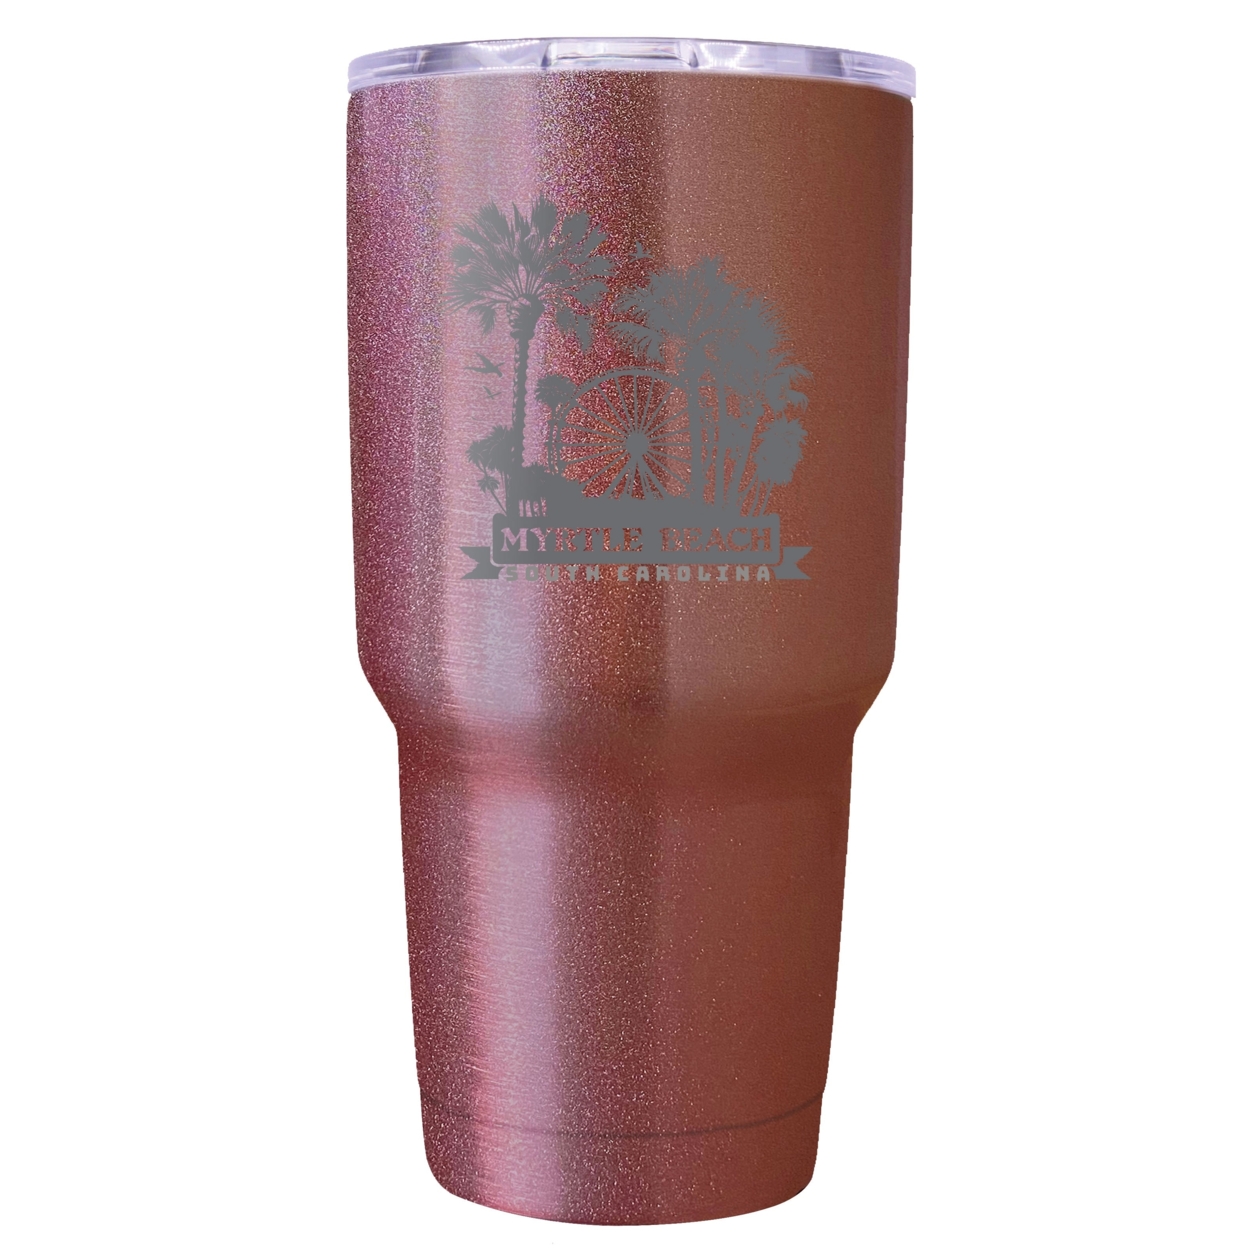 Myrtle Beach South Carolina Laser Etched Souvenir 24 Oz Insulated Stainless Steel Tumbler - Gold